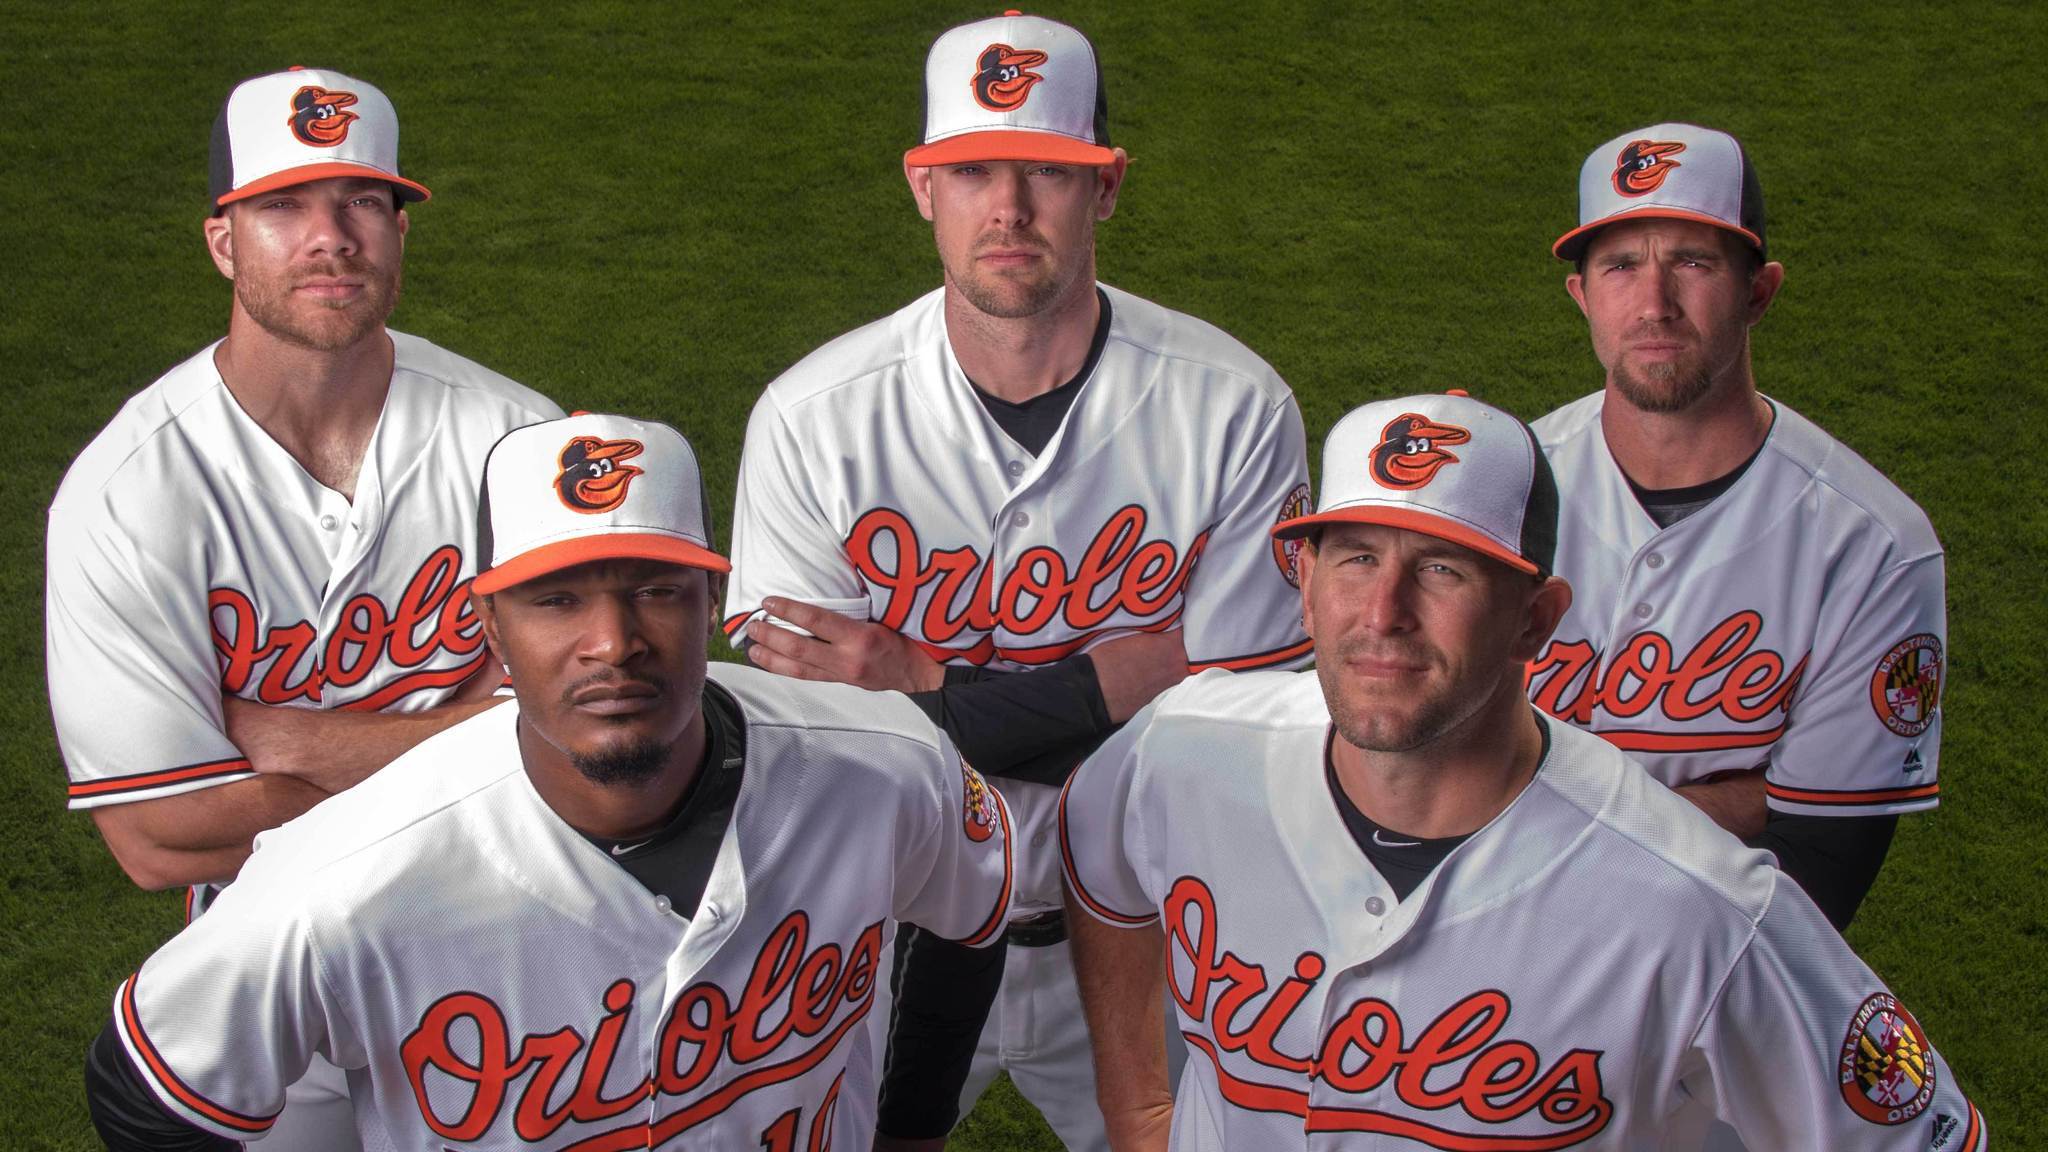 Keeping the band together: Orioles stick with what's familiar